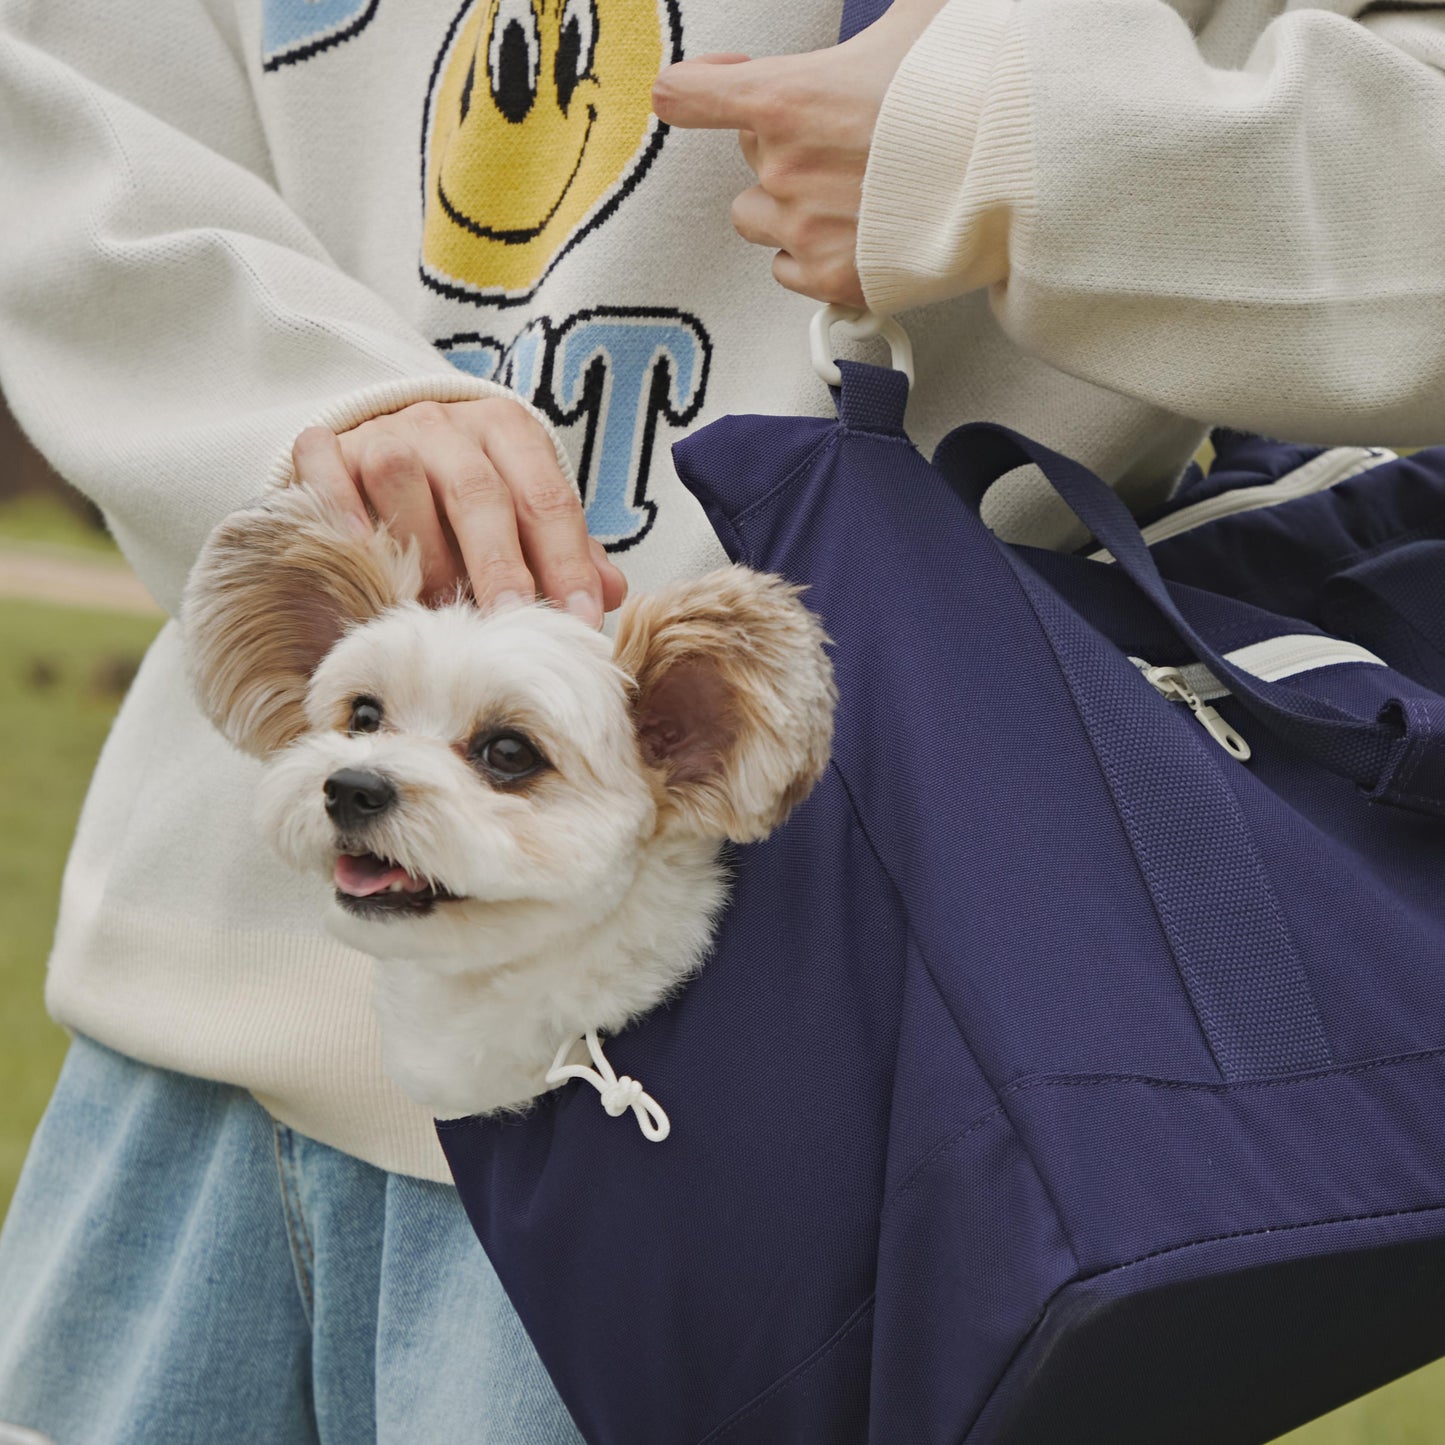 arrr Macaron Po-ong Bag (Pet Carrier) with dual use as an outgoing bag and portable cushion. Keep your pet safe and comfortable during outdoor activities. In Deep Navy colour